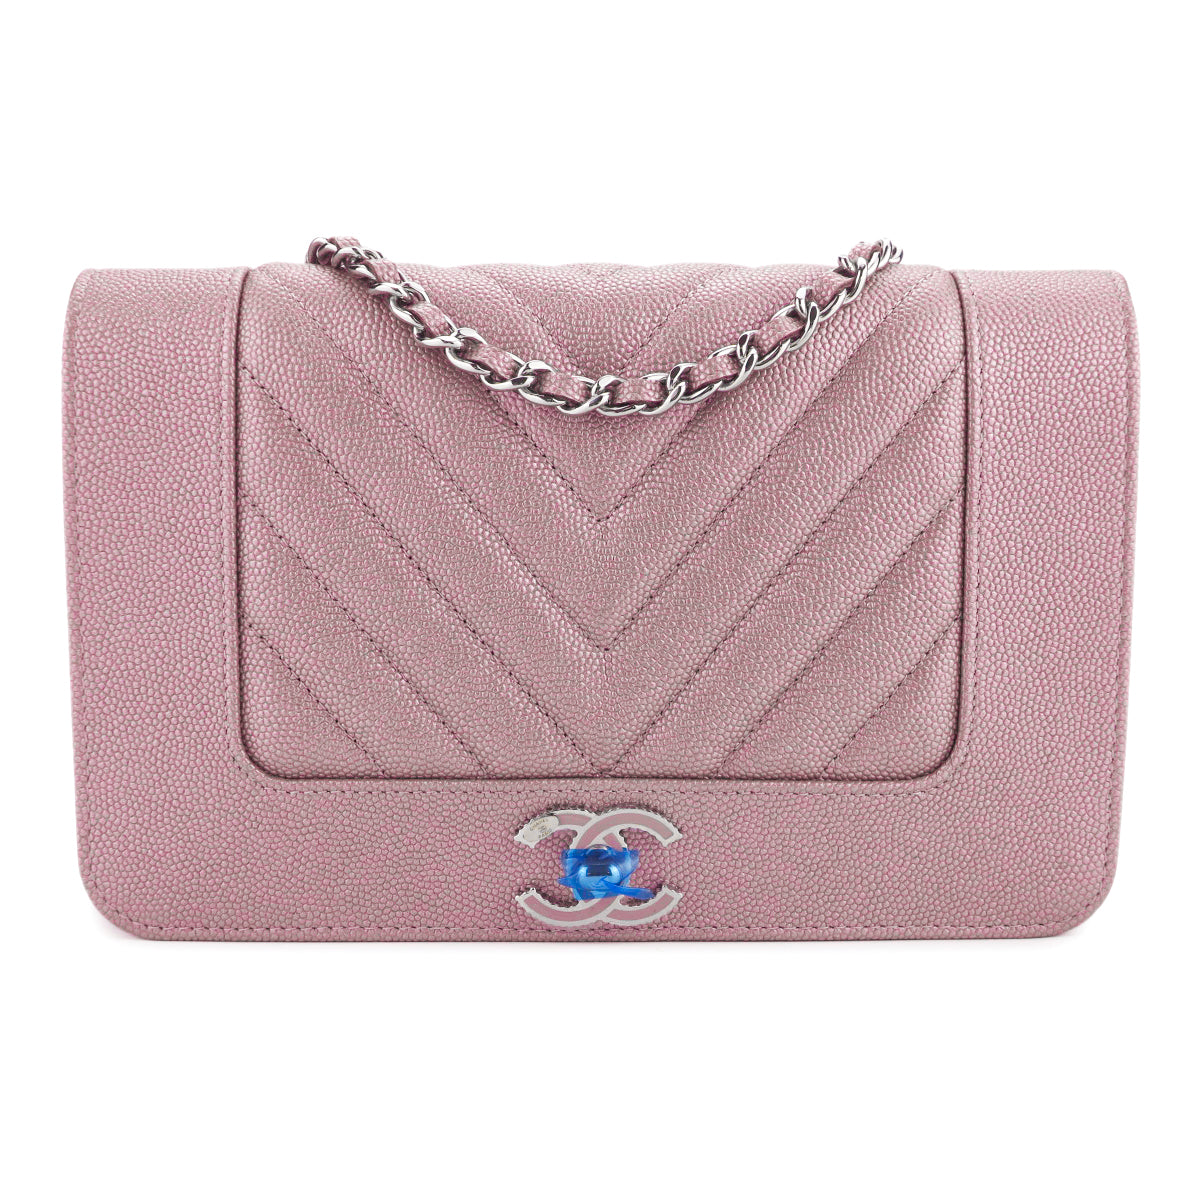 Mademoiselle Wallet On Chain WOC in Rose Gold Caviar